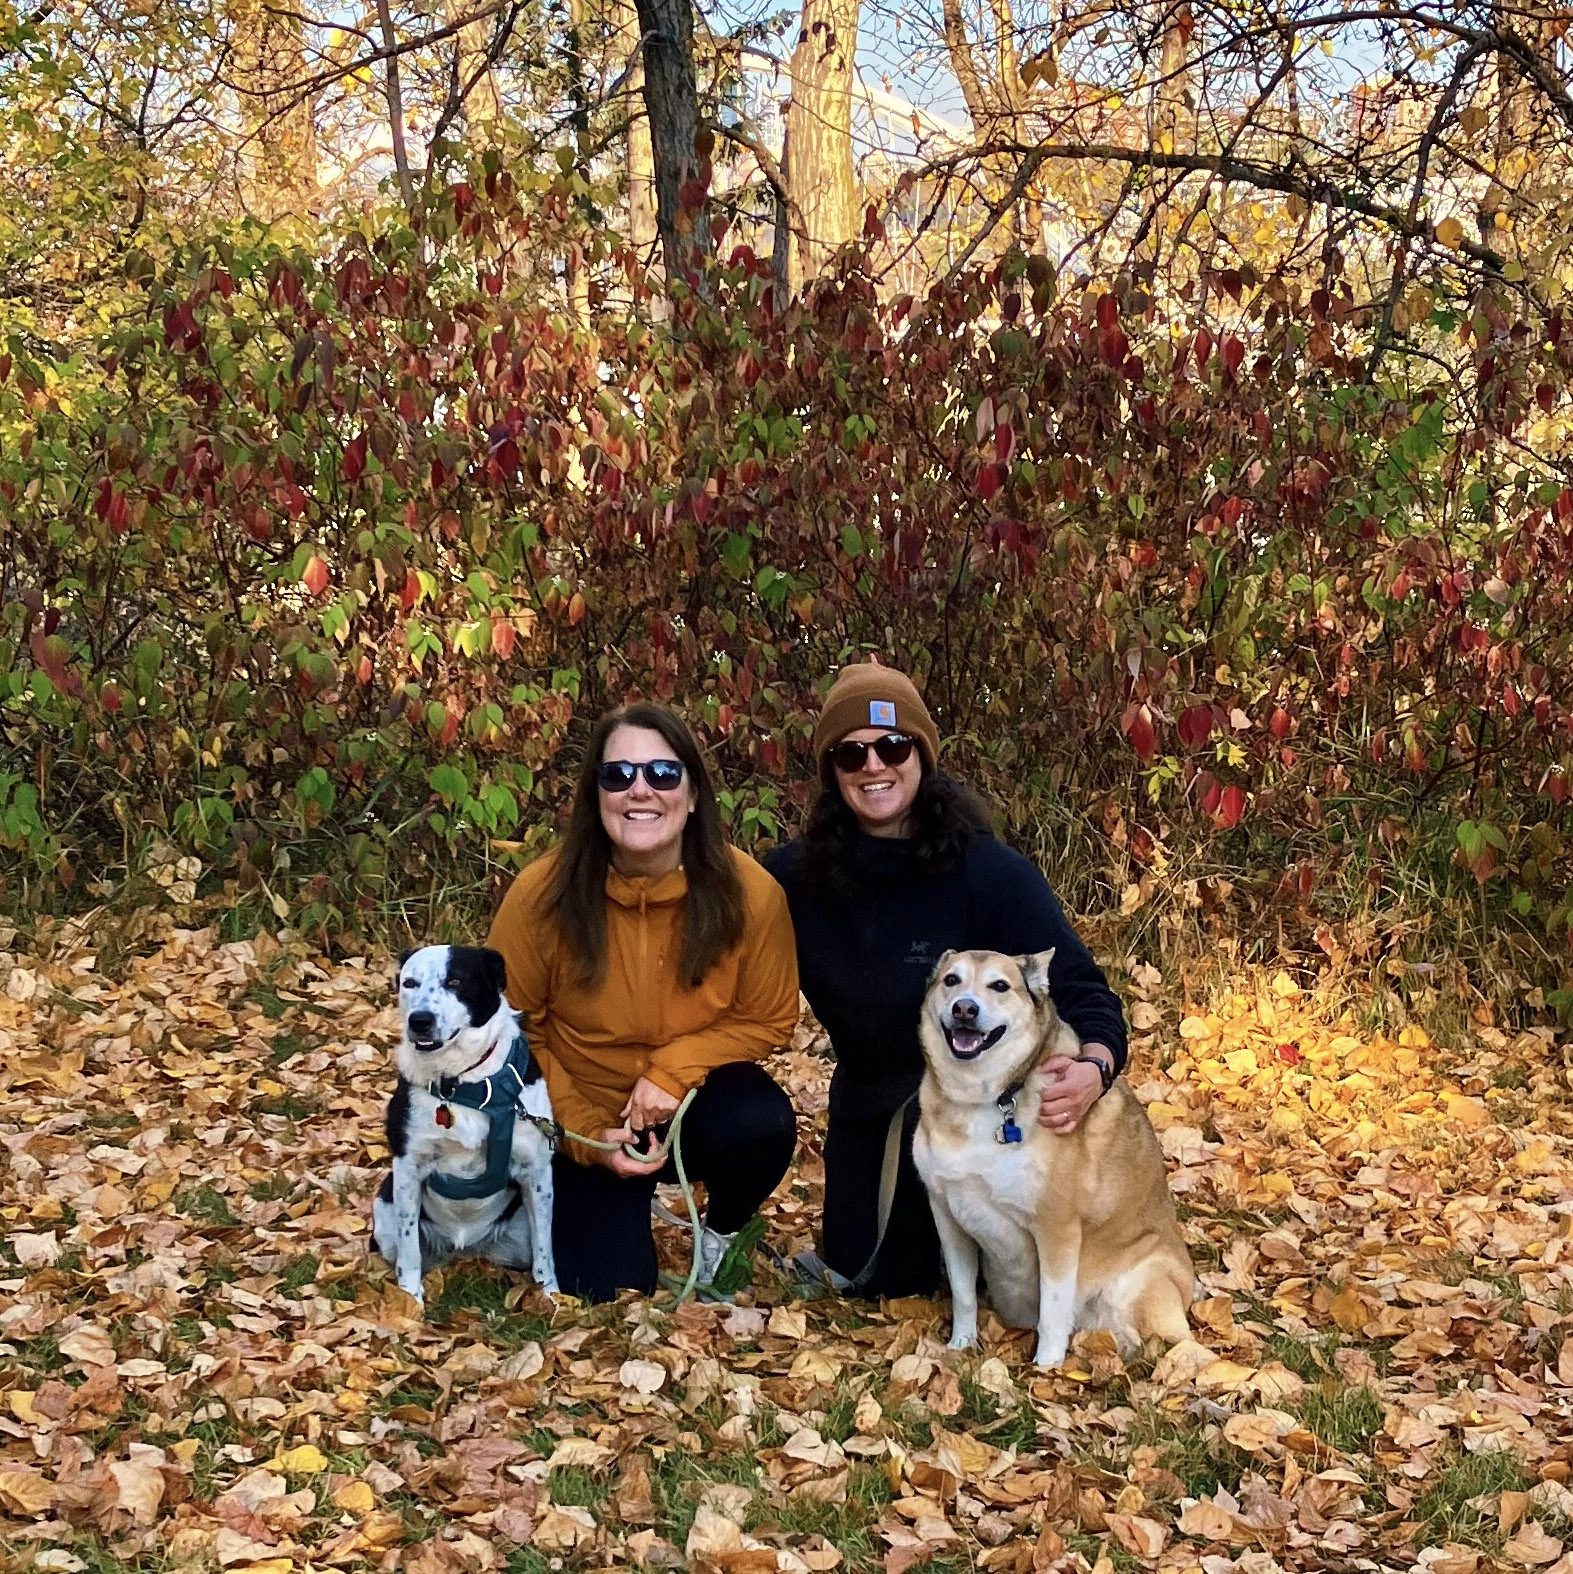 Emma, her wife Jen, and their dogs Penny and Pippin in front of autumnal foliage.